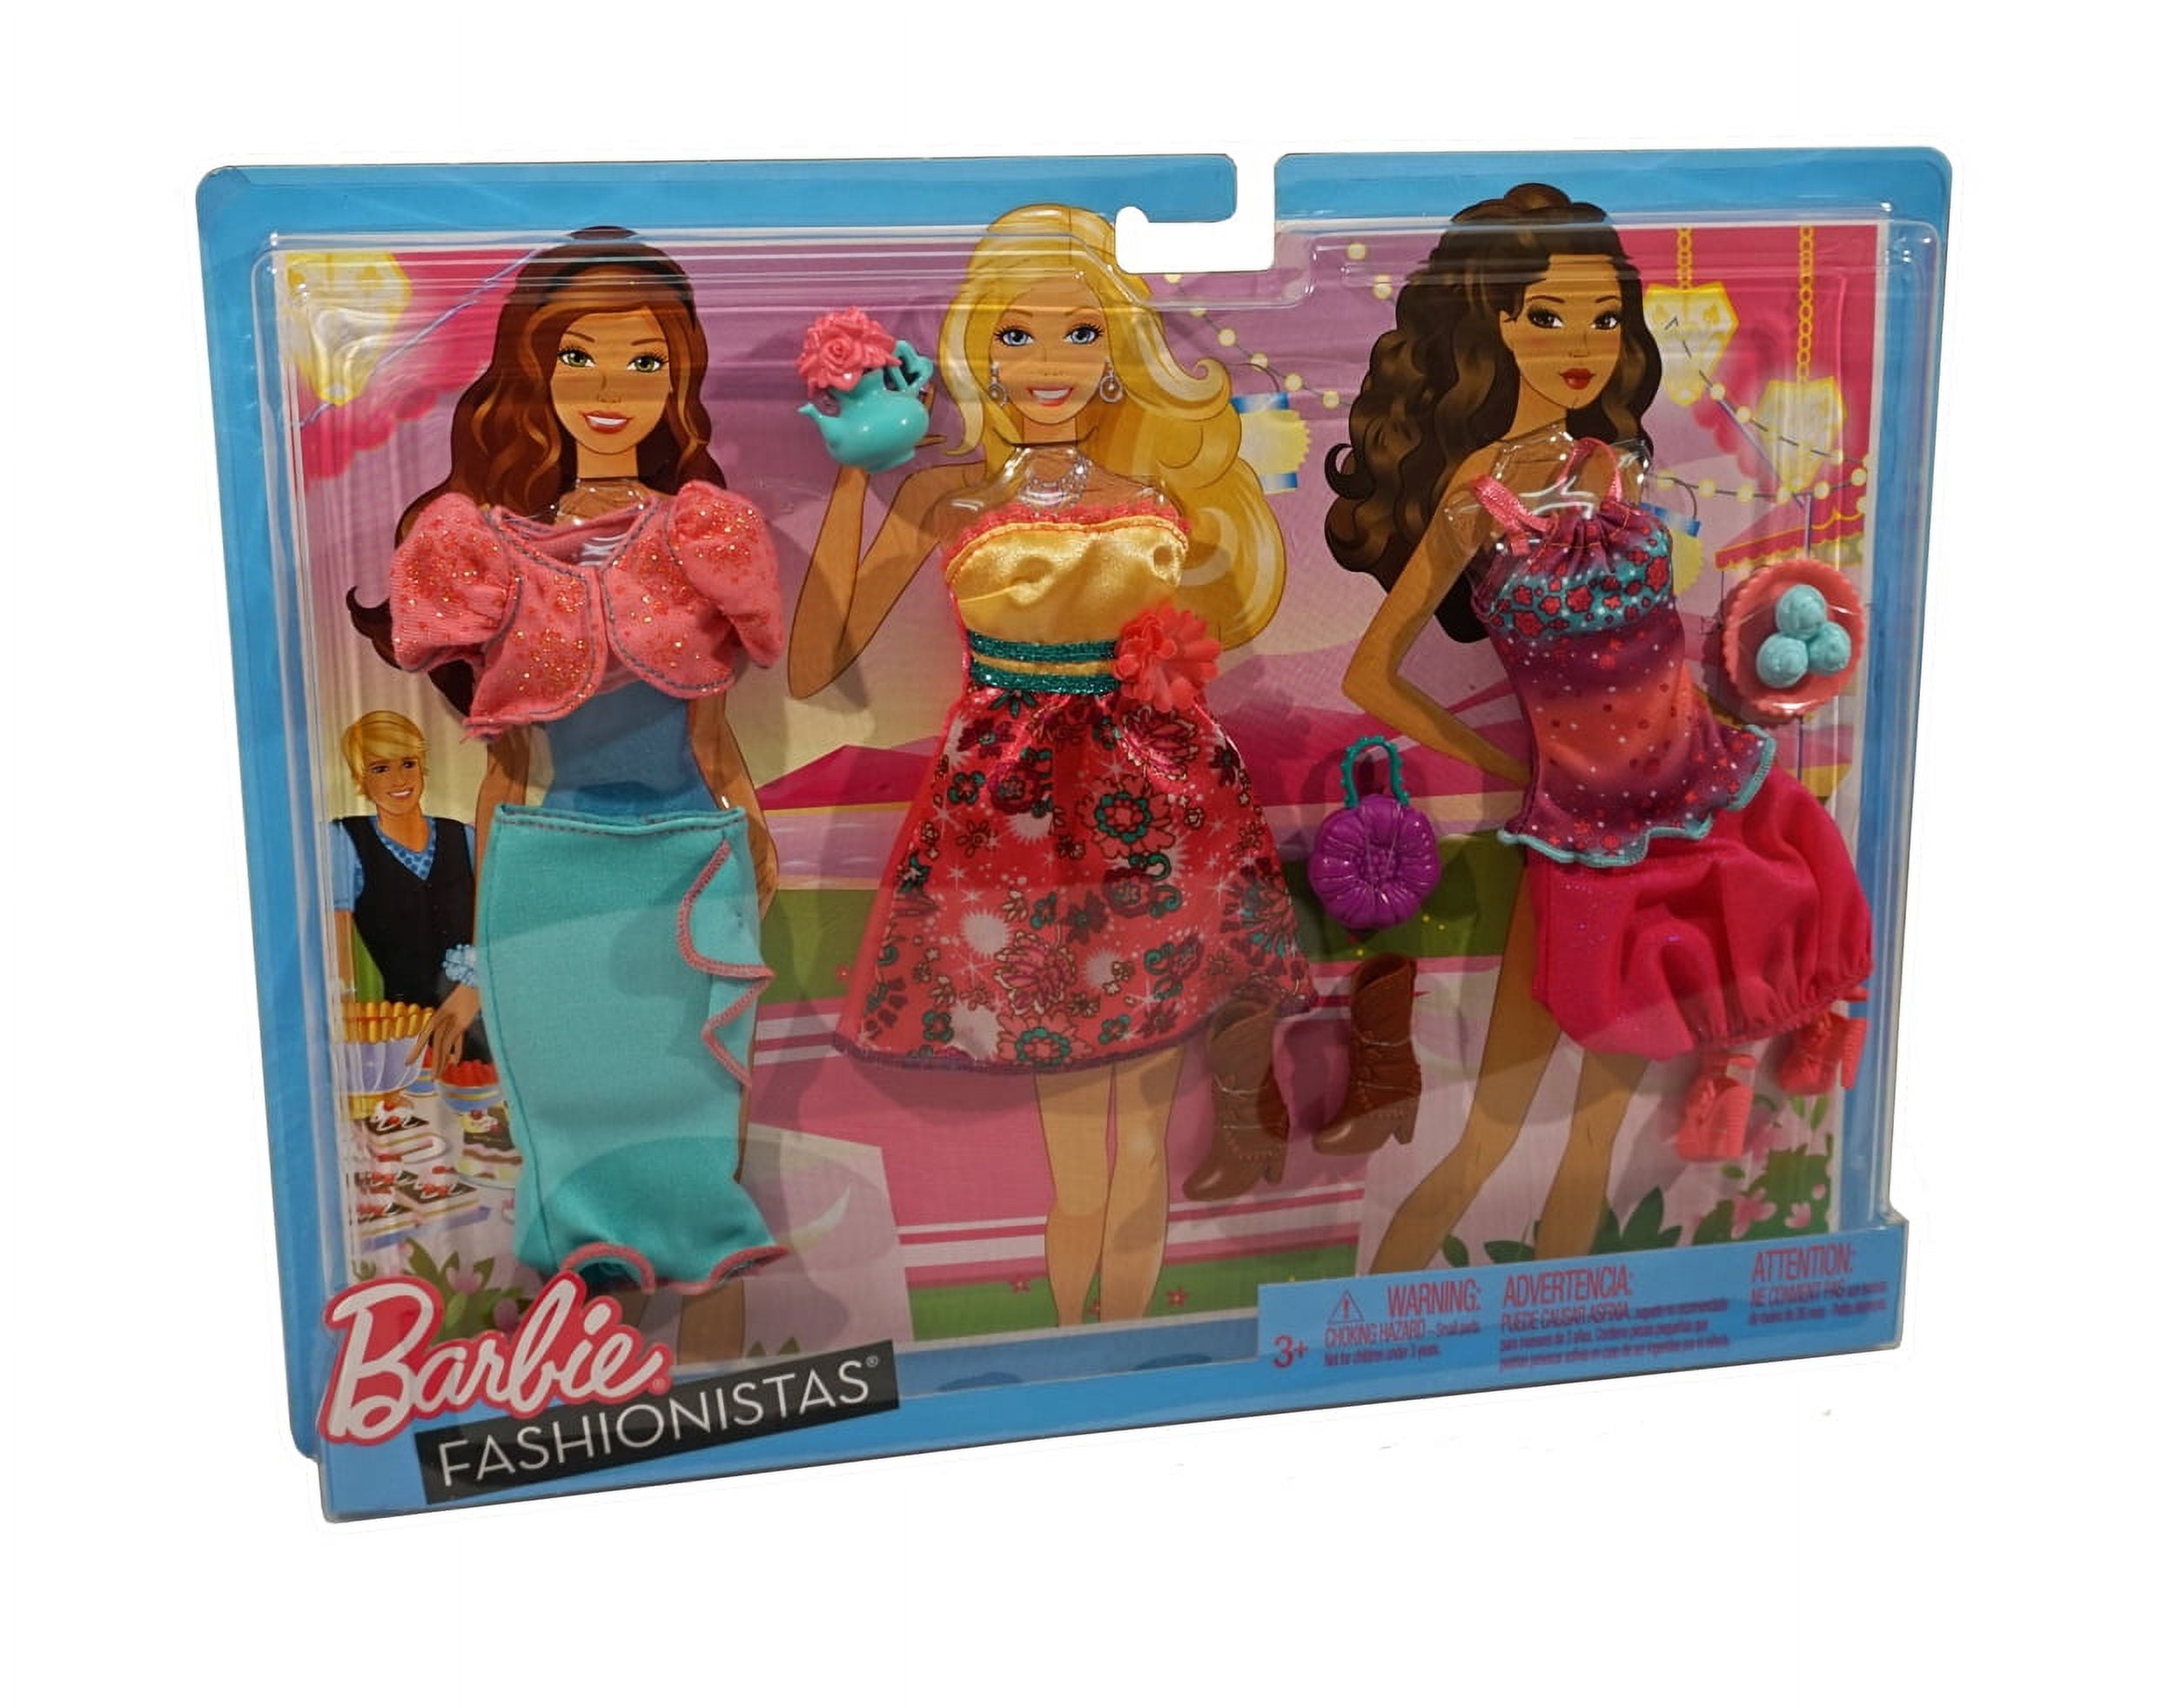 Barbie Fashionistas Tea Party Outfits - Contains 3 Doll Outfits ...